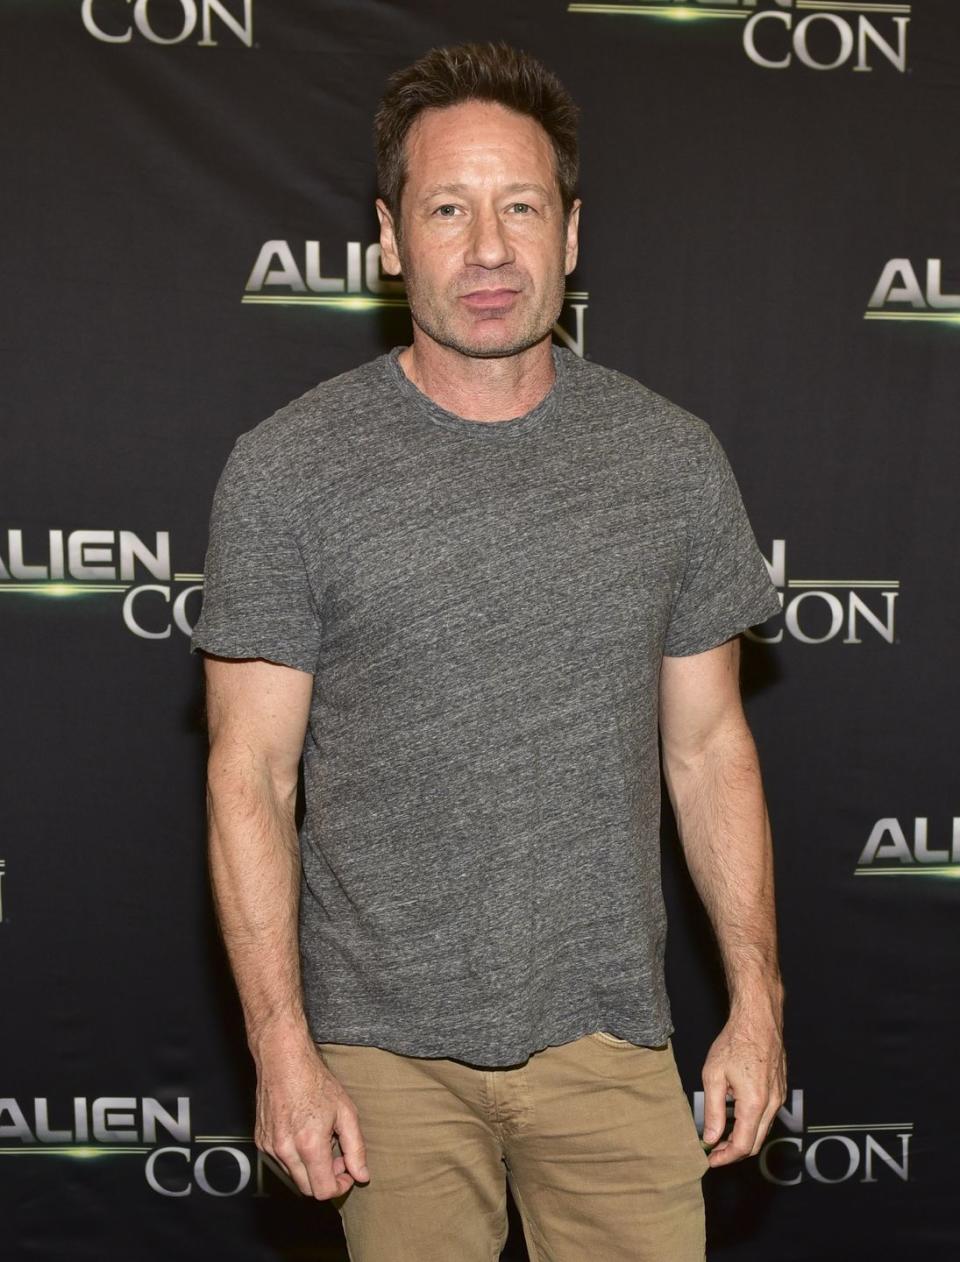 <p>The <em>X-Files</em> actor graduated summa cum laude from Princeton University in 1982 and then went on to pursue a master's degree from Yale University. </p>